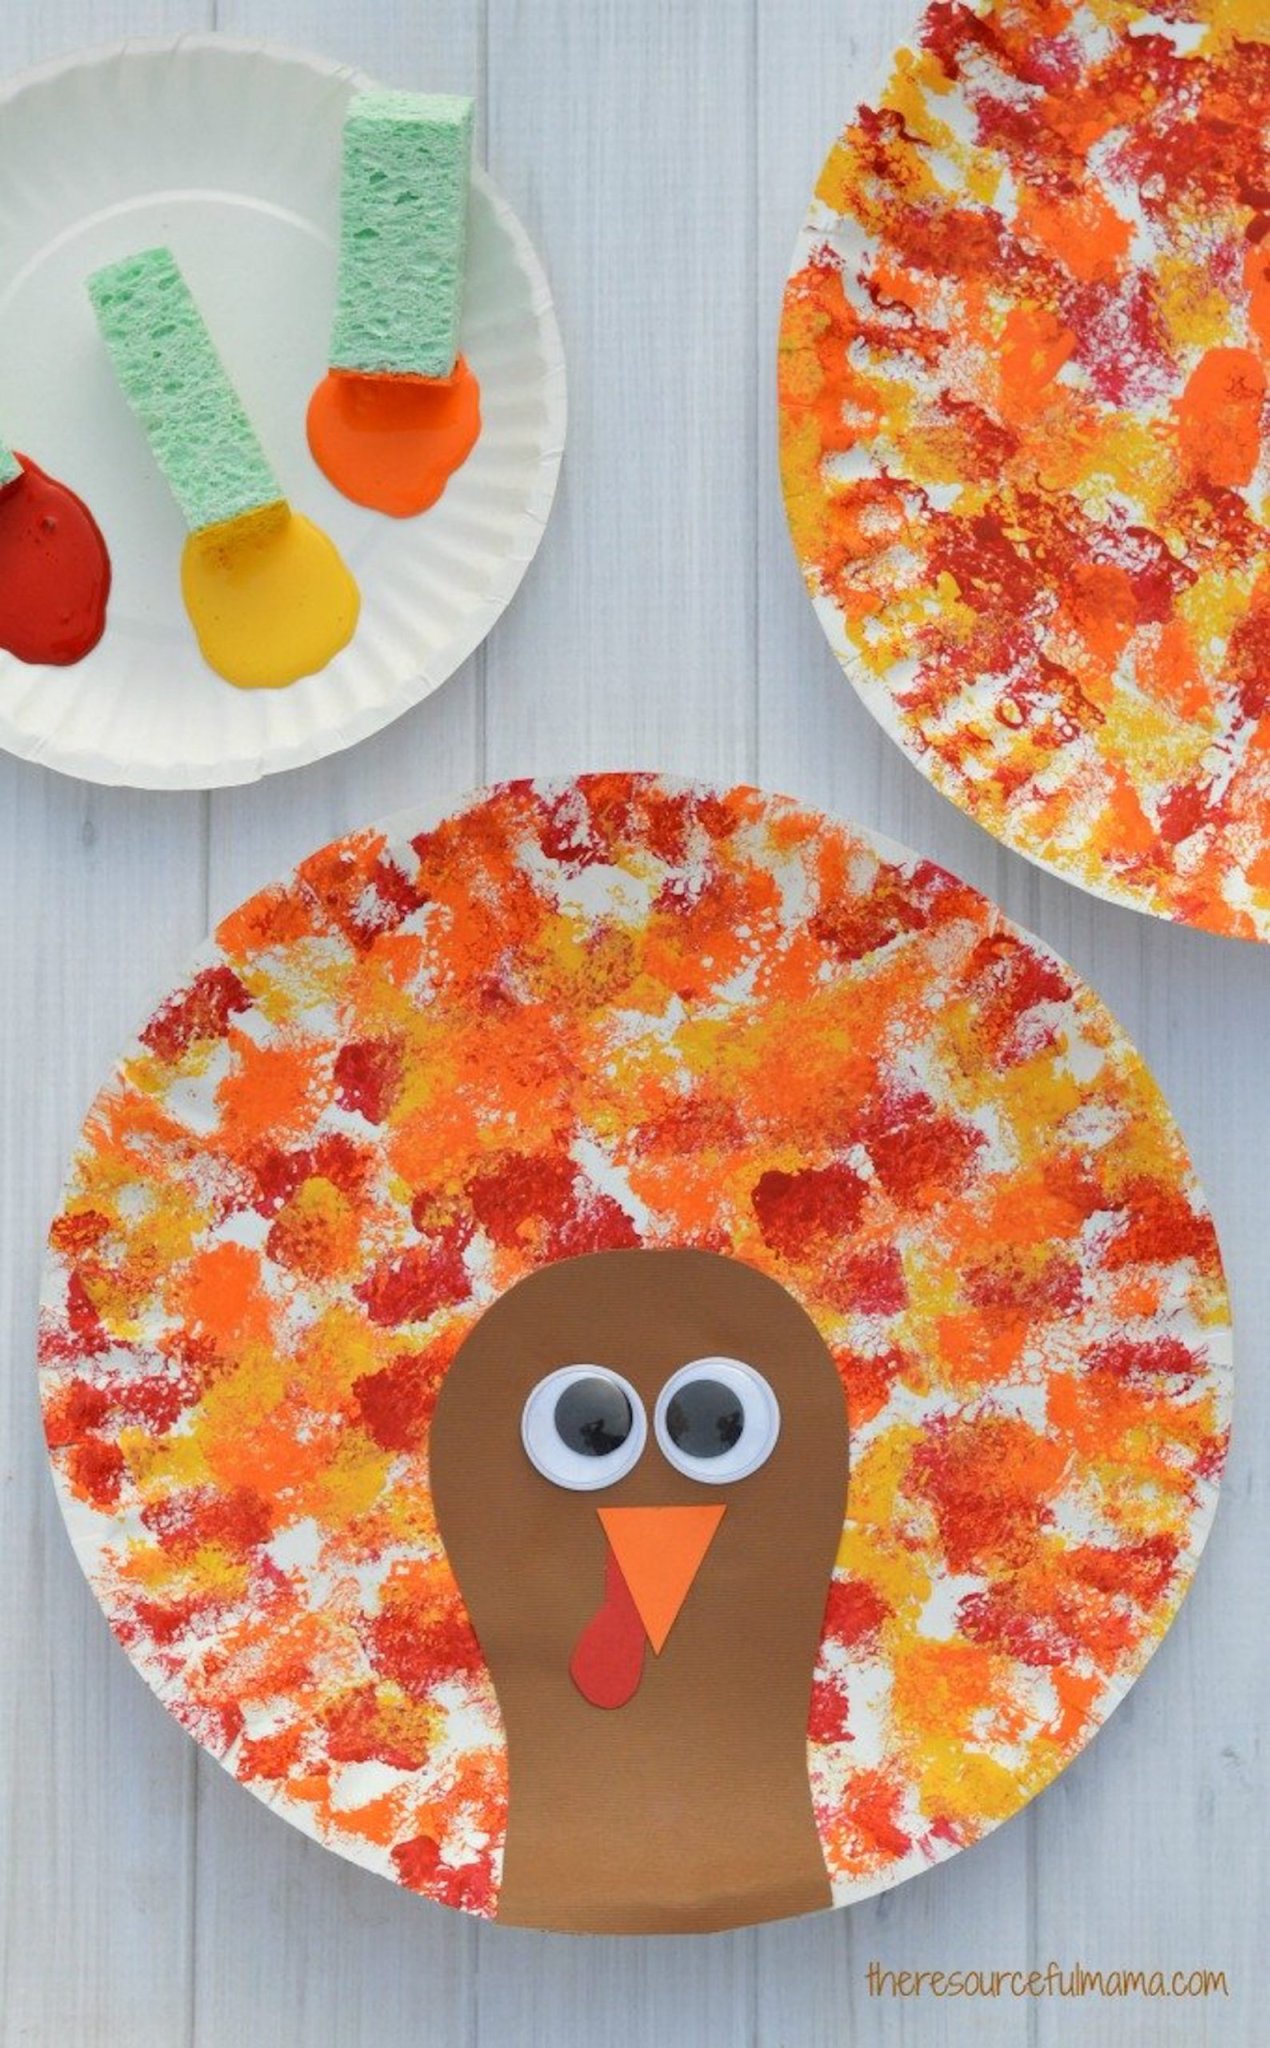 50 Fun-Filled Thanksgiving Activities for Kids That'll Make Turkey Day Even More Exciting